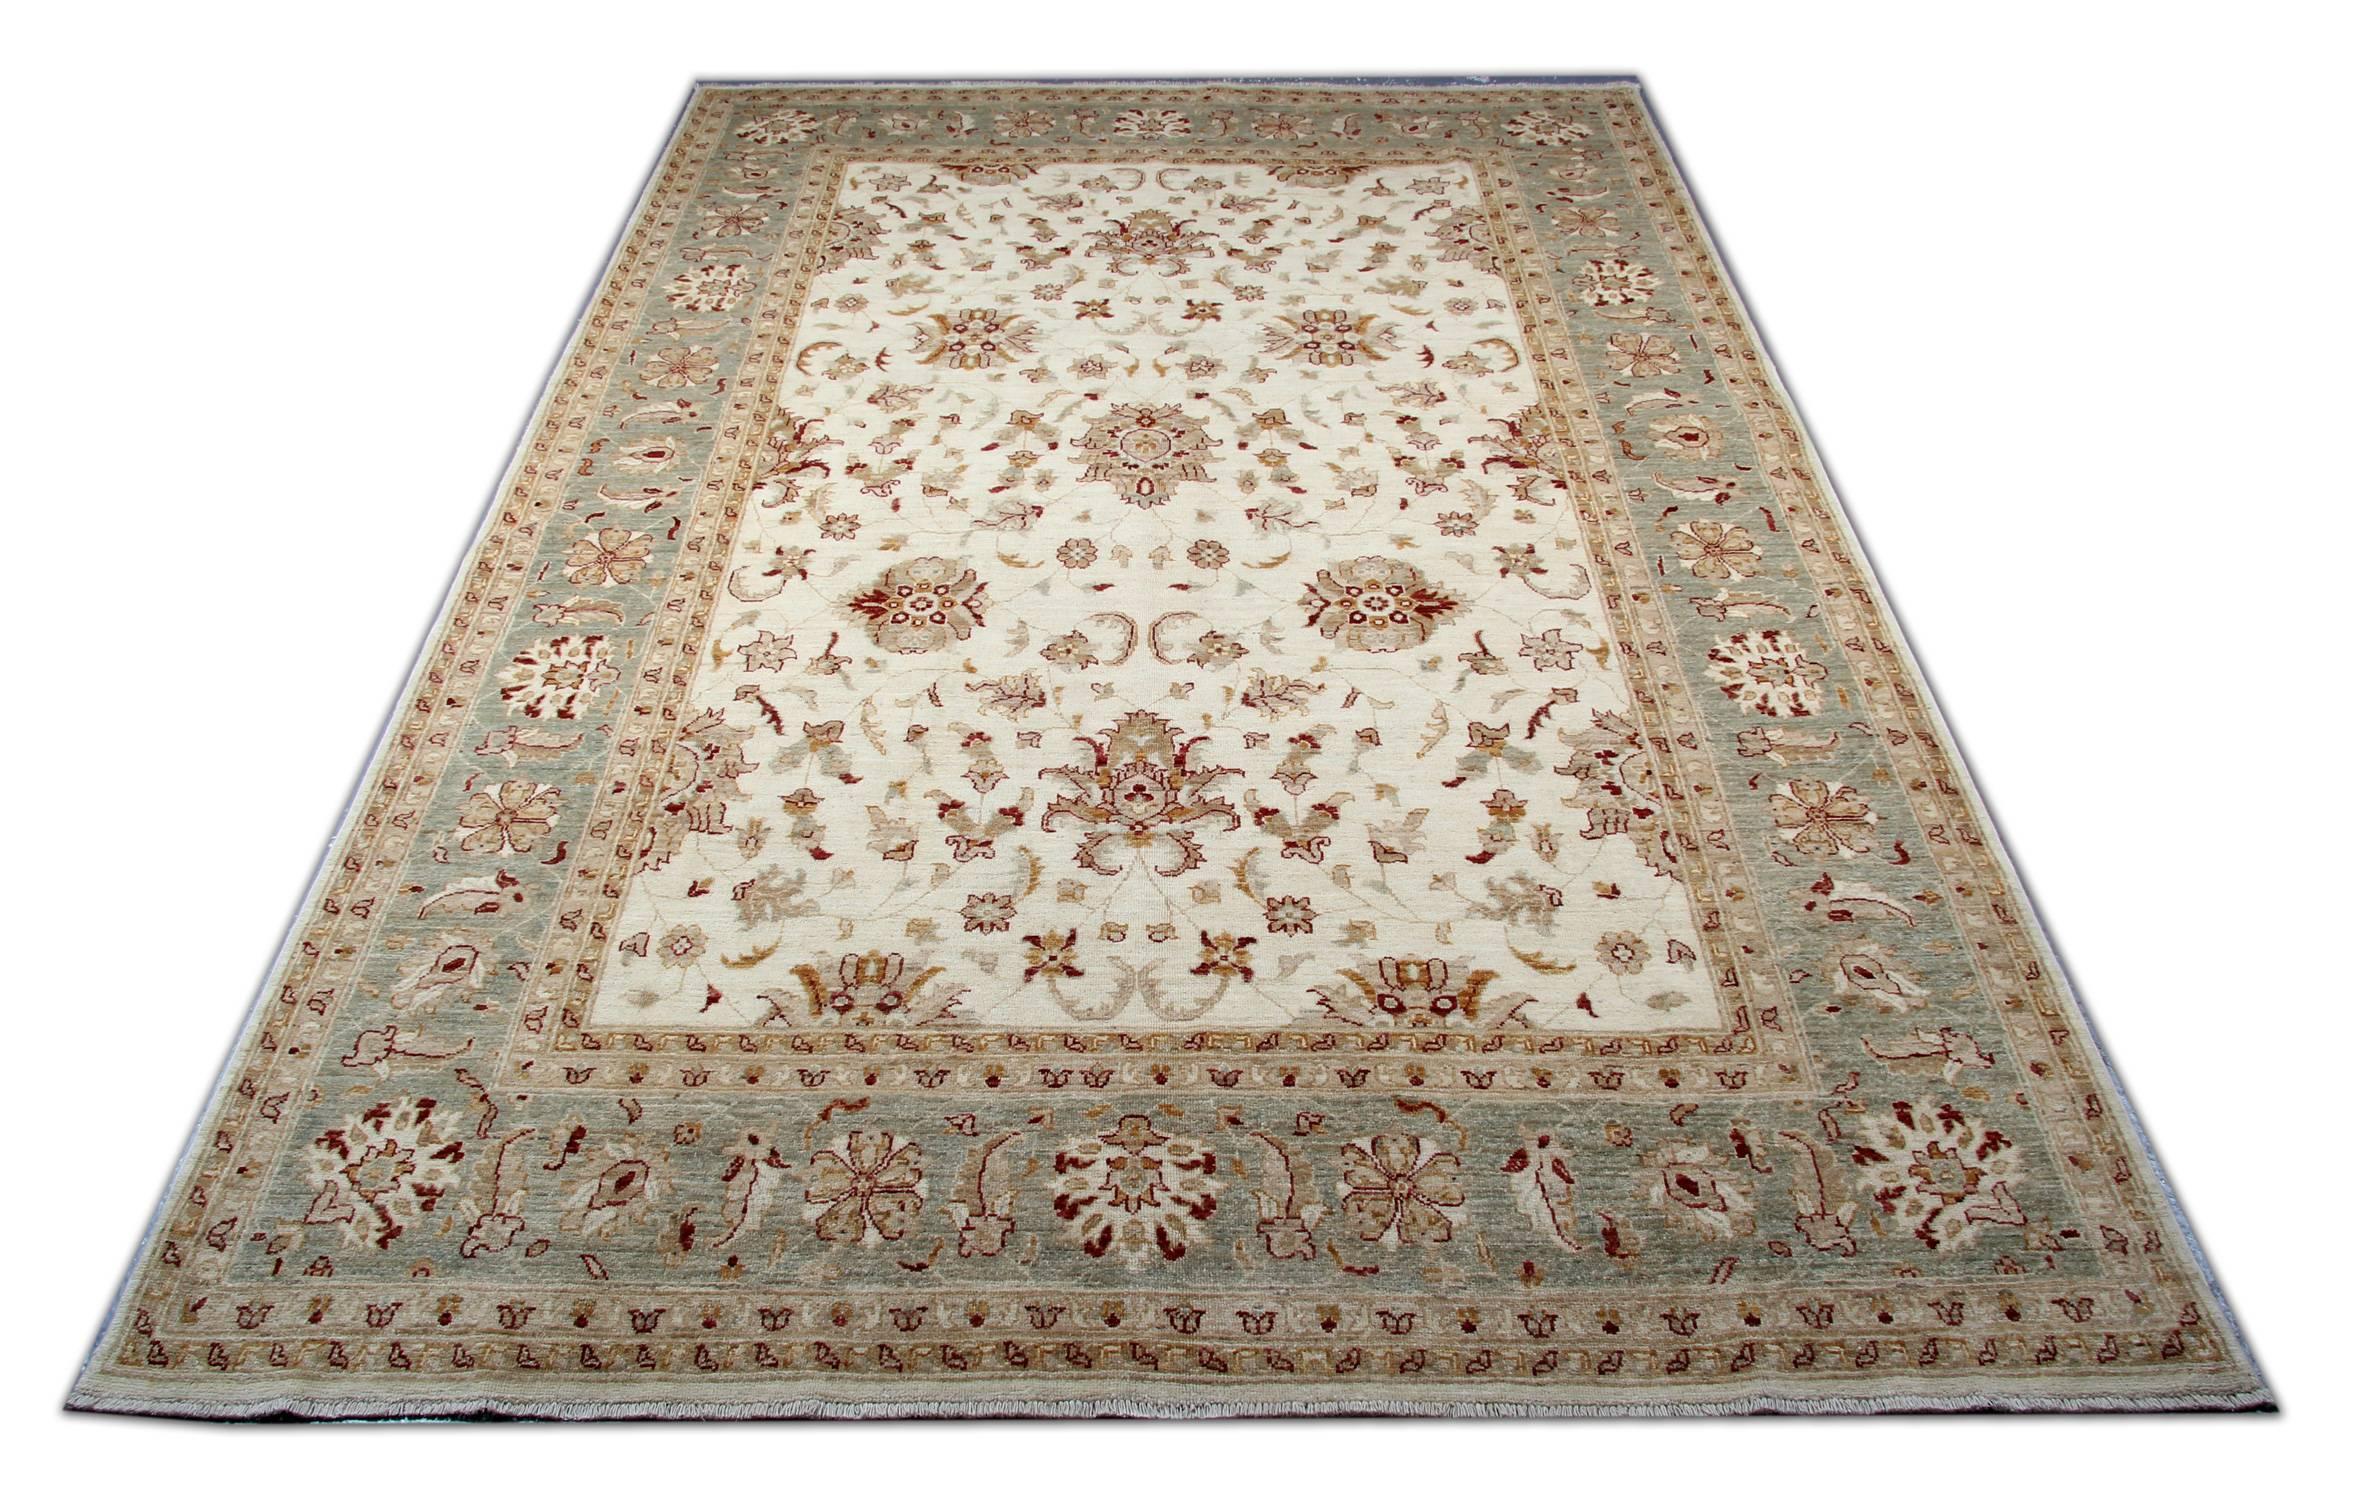 There is traditional rugs kind of our luxury rugs made of our own looms by our master weavers of Afghan rugs, this cream rug is made with organic vegetable dyes all handspun wool rugs. This carpet rug is a kind of patterned rugs all-over floral rugs